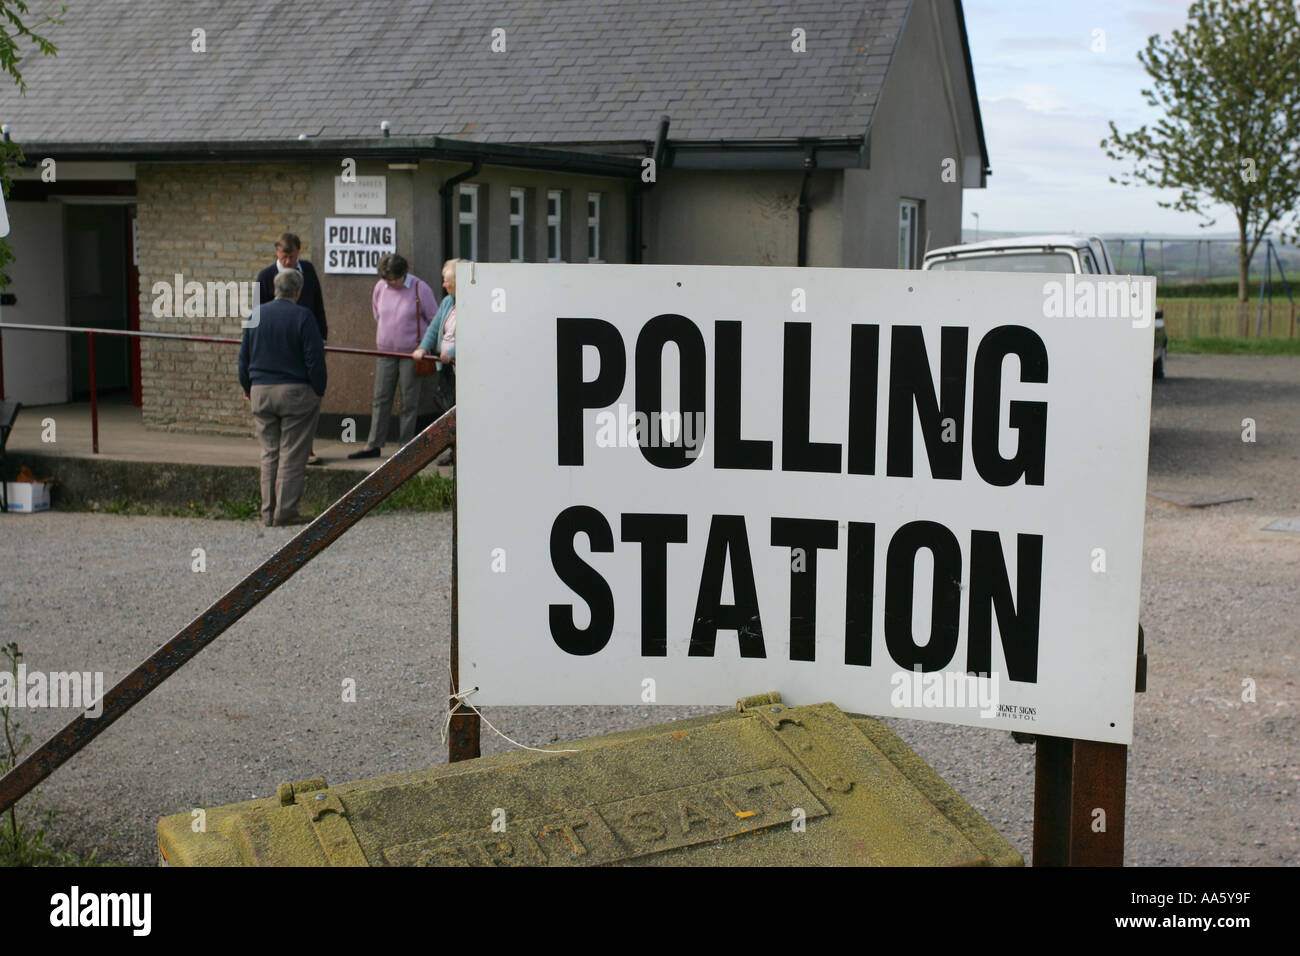 People exit a British general local election polling station in a quiet rural village community centre South Devon England UK GB Stock Photo